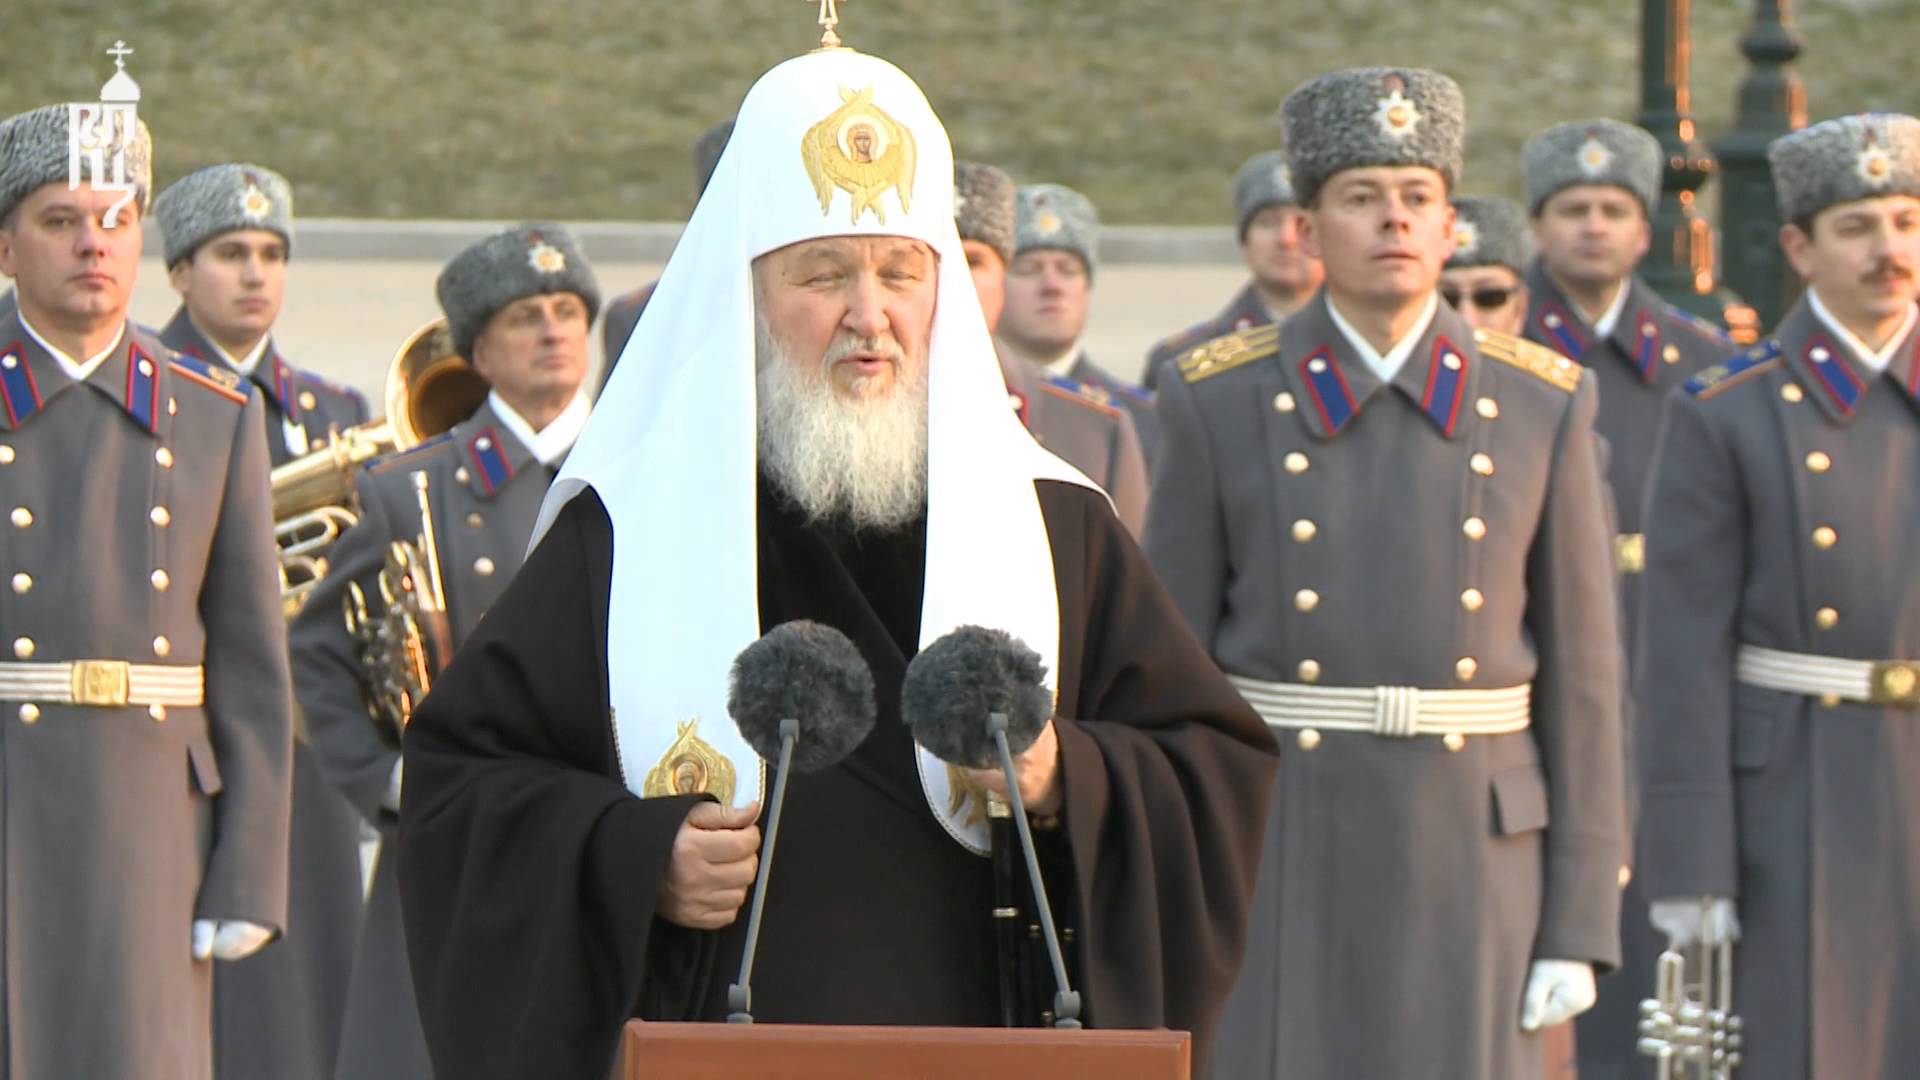 Patriarch Kirill, the head of the Russian Orthodox Church (Moscow Patriarchate)